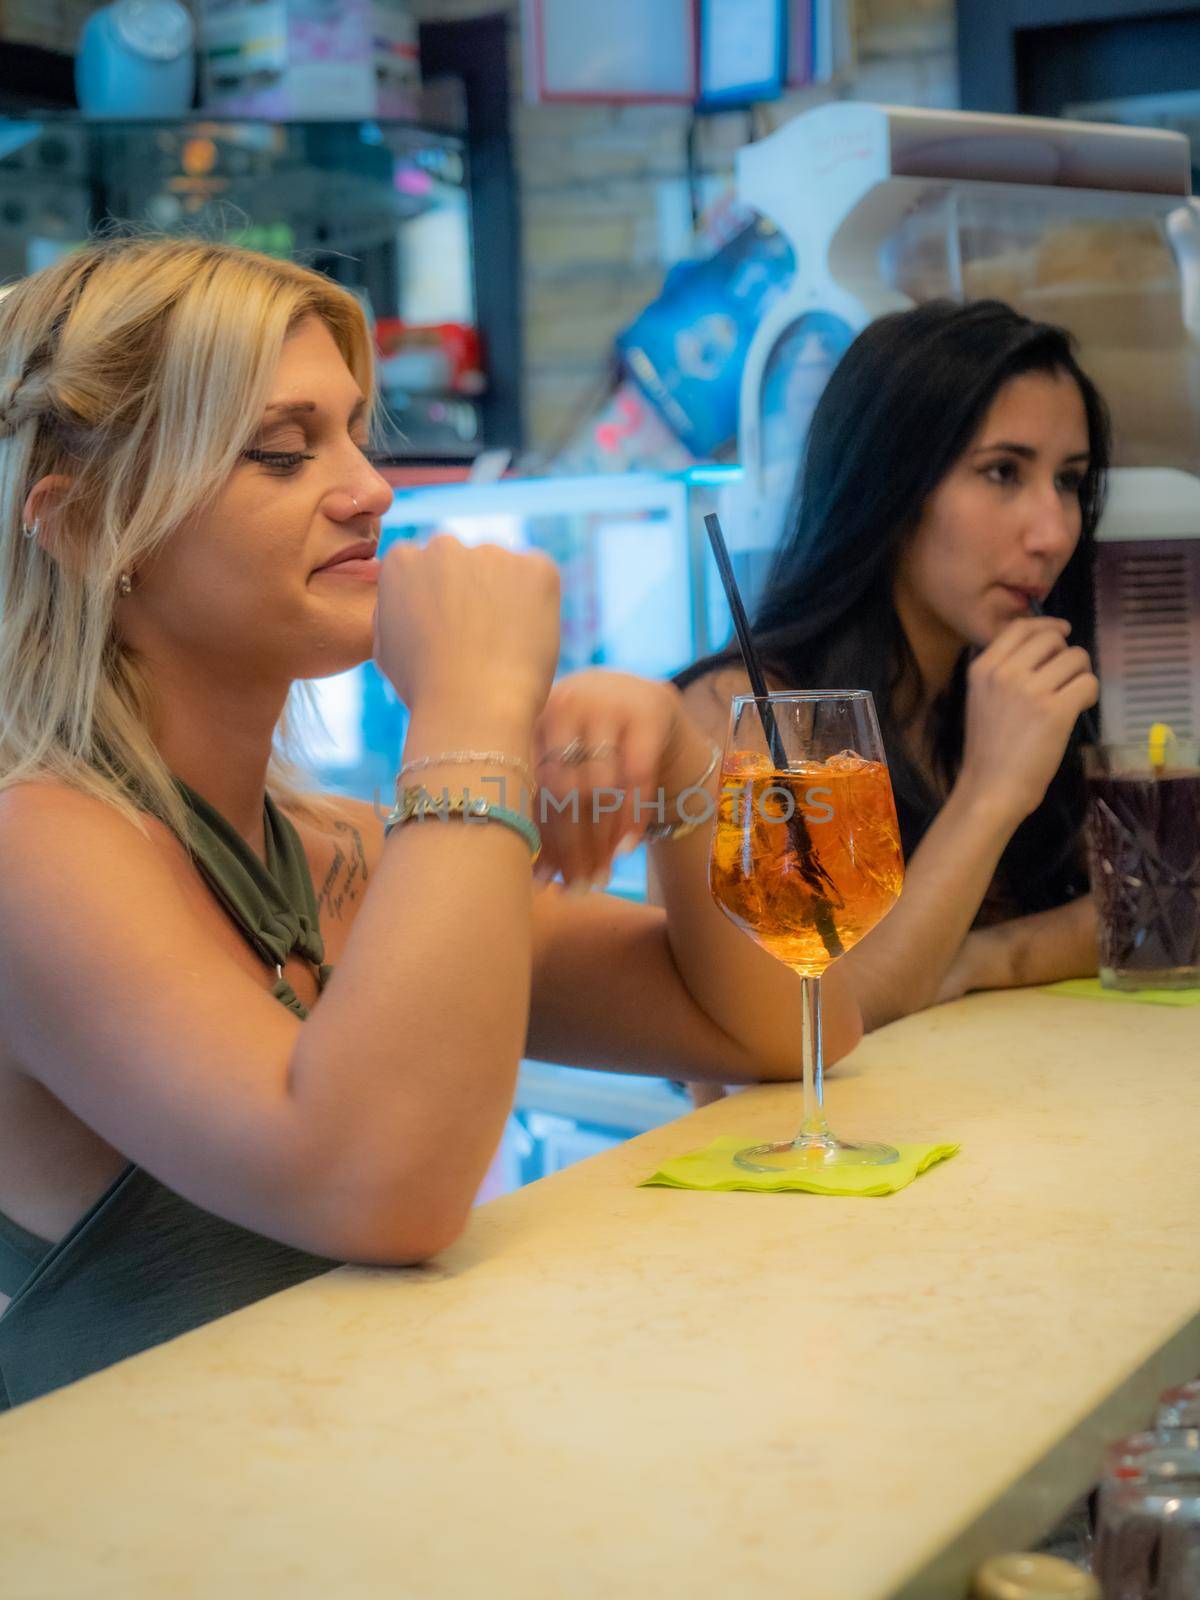 women friends drinking cocktails at the bar counter having good time